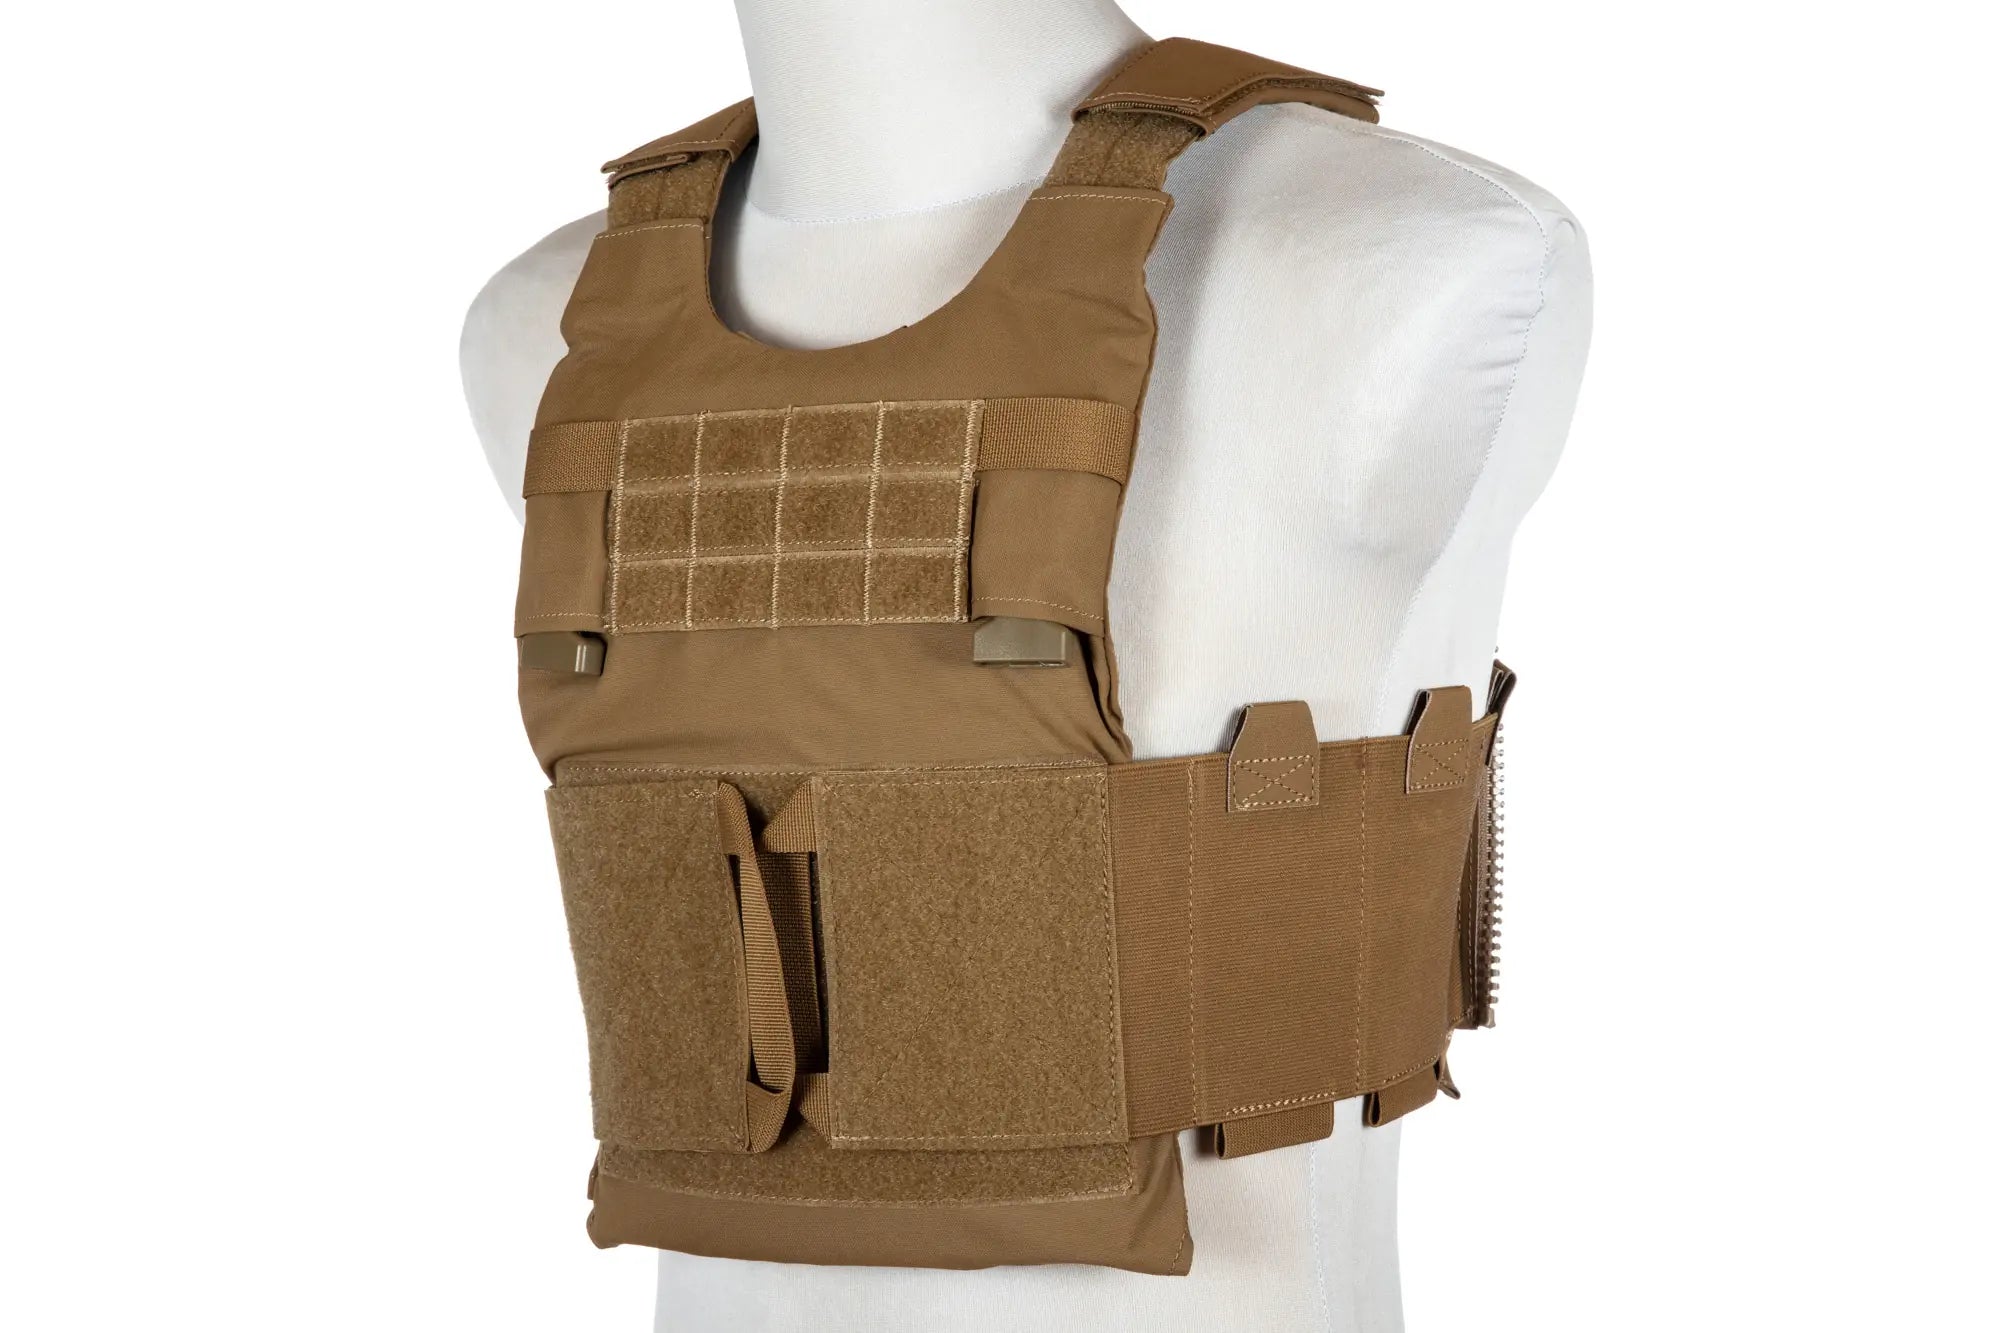 LV-119 Type Tactical Vest - Coyote Brown